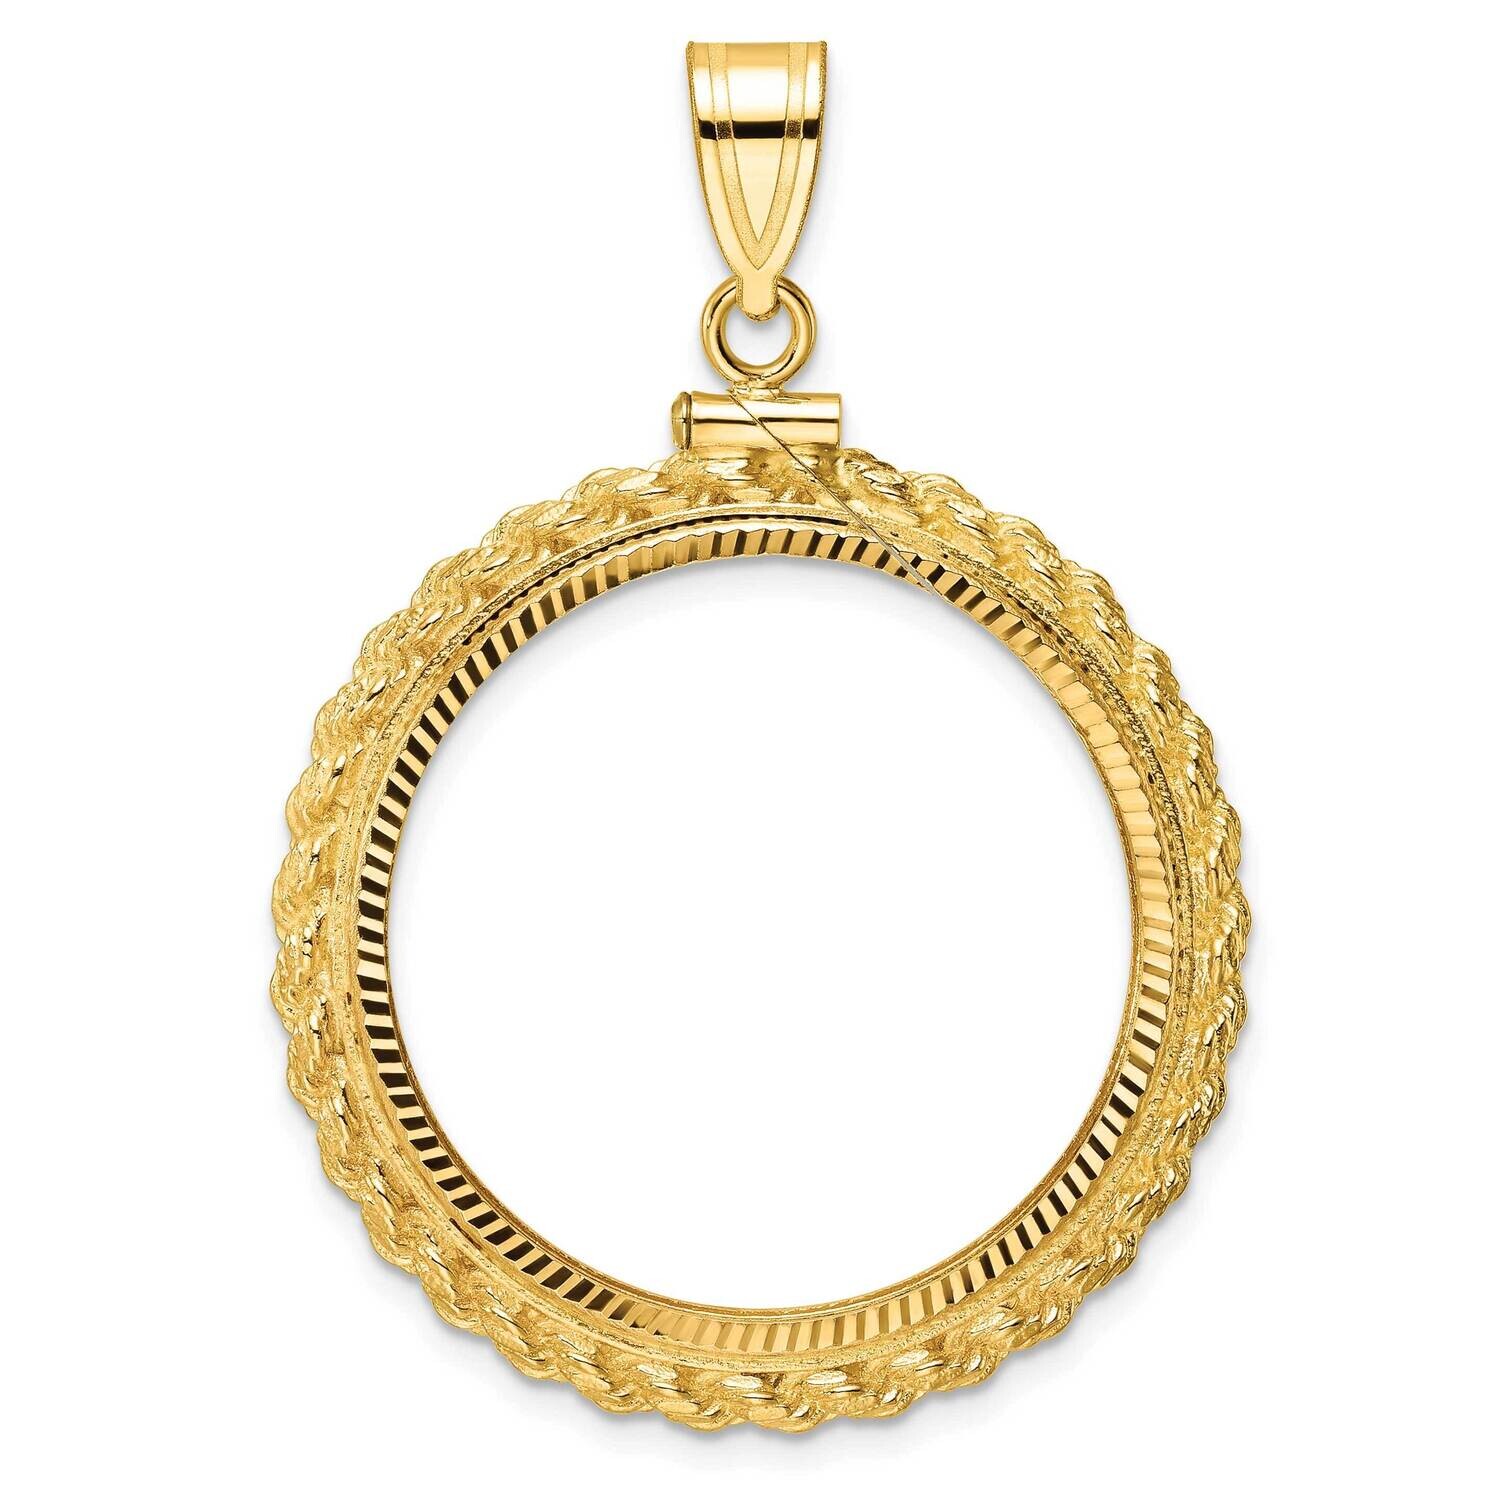 Diamond-Cut Casted Rope Screw Top 27mm X 2.35mm Coin Bezel Pendant 14k Gold C8196/27.0